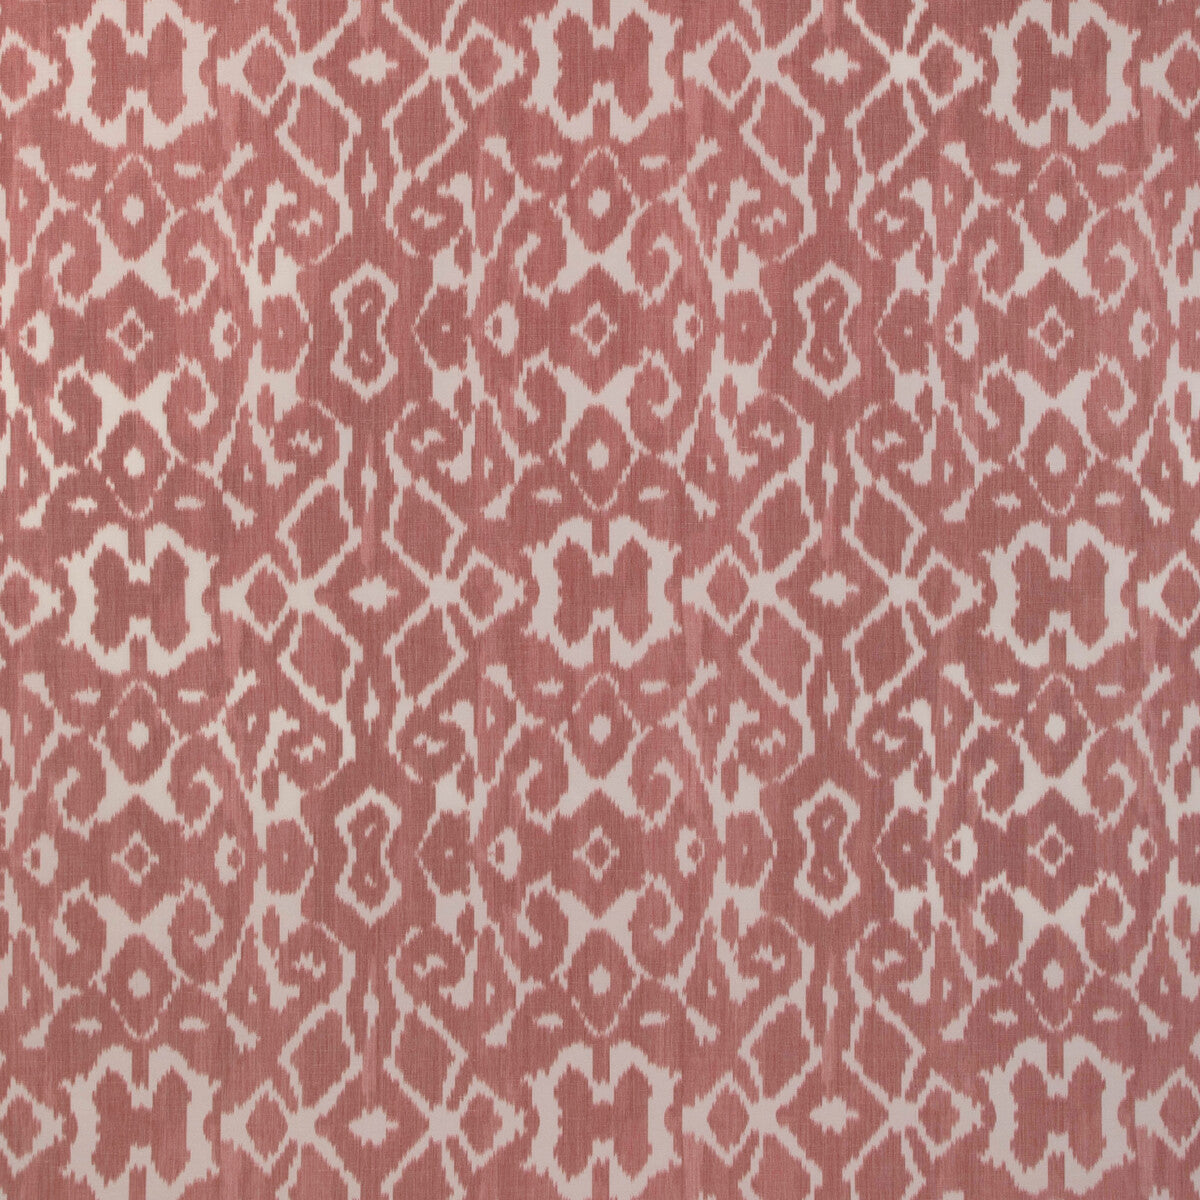 Toponas Print fabric in rose color - pattern 2020206.97.0 - by Lee Jofa in the Clare Prints collection